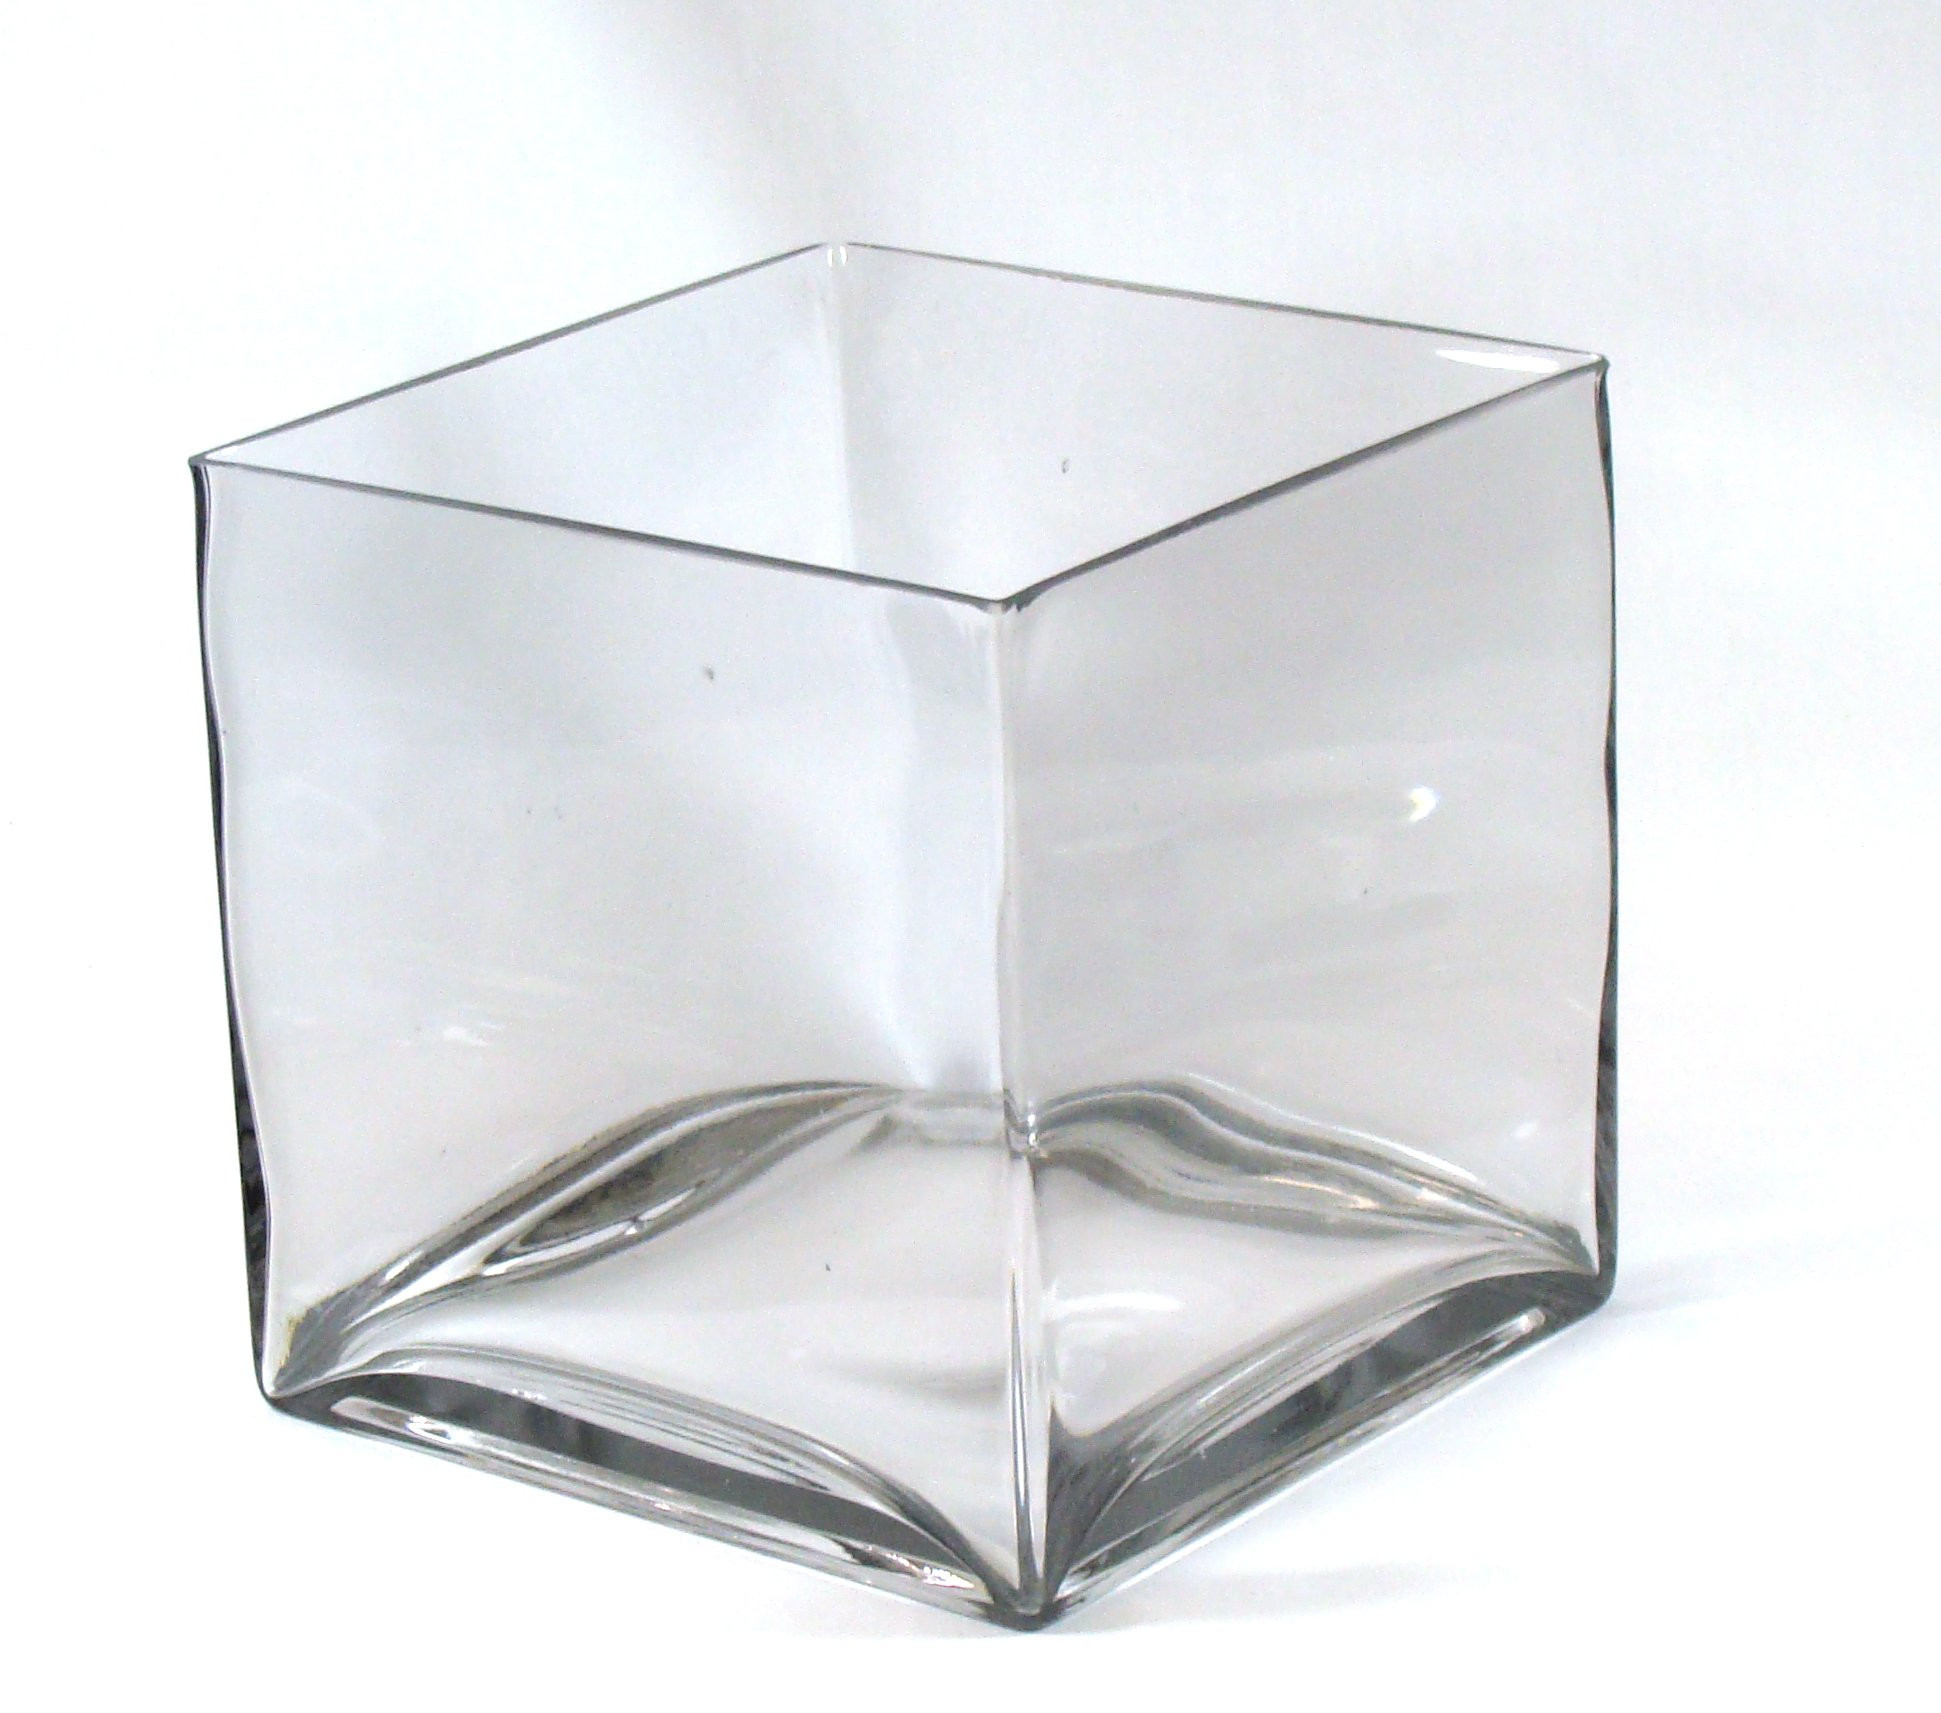 13 Lovely 24 Inch Clear Vases 2024 free download 24 inch clear vases of buy 8 inch round large glass vase 8 clear cylinder oversize within 8 square large glass vase 8 inch clear cube oversize centerpiece 8x8x8 candleholder